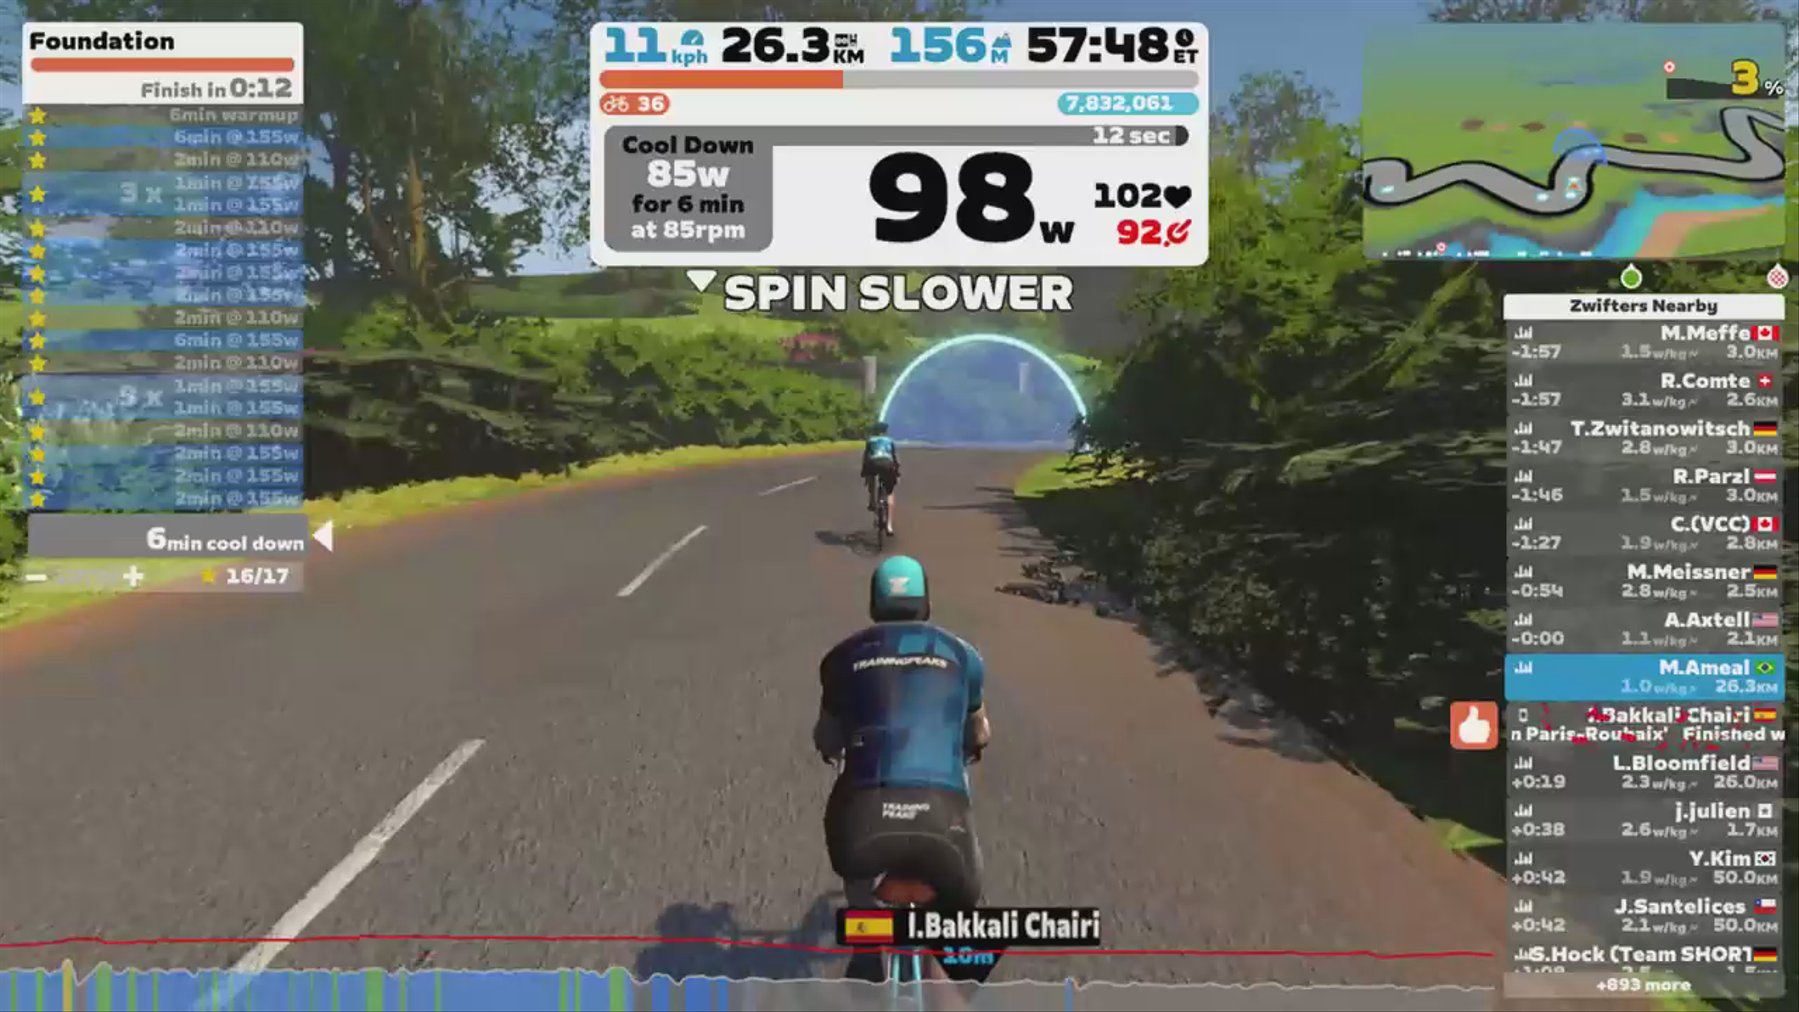 Zwift - Foundation in France